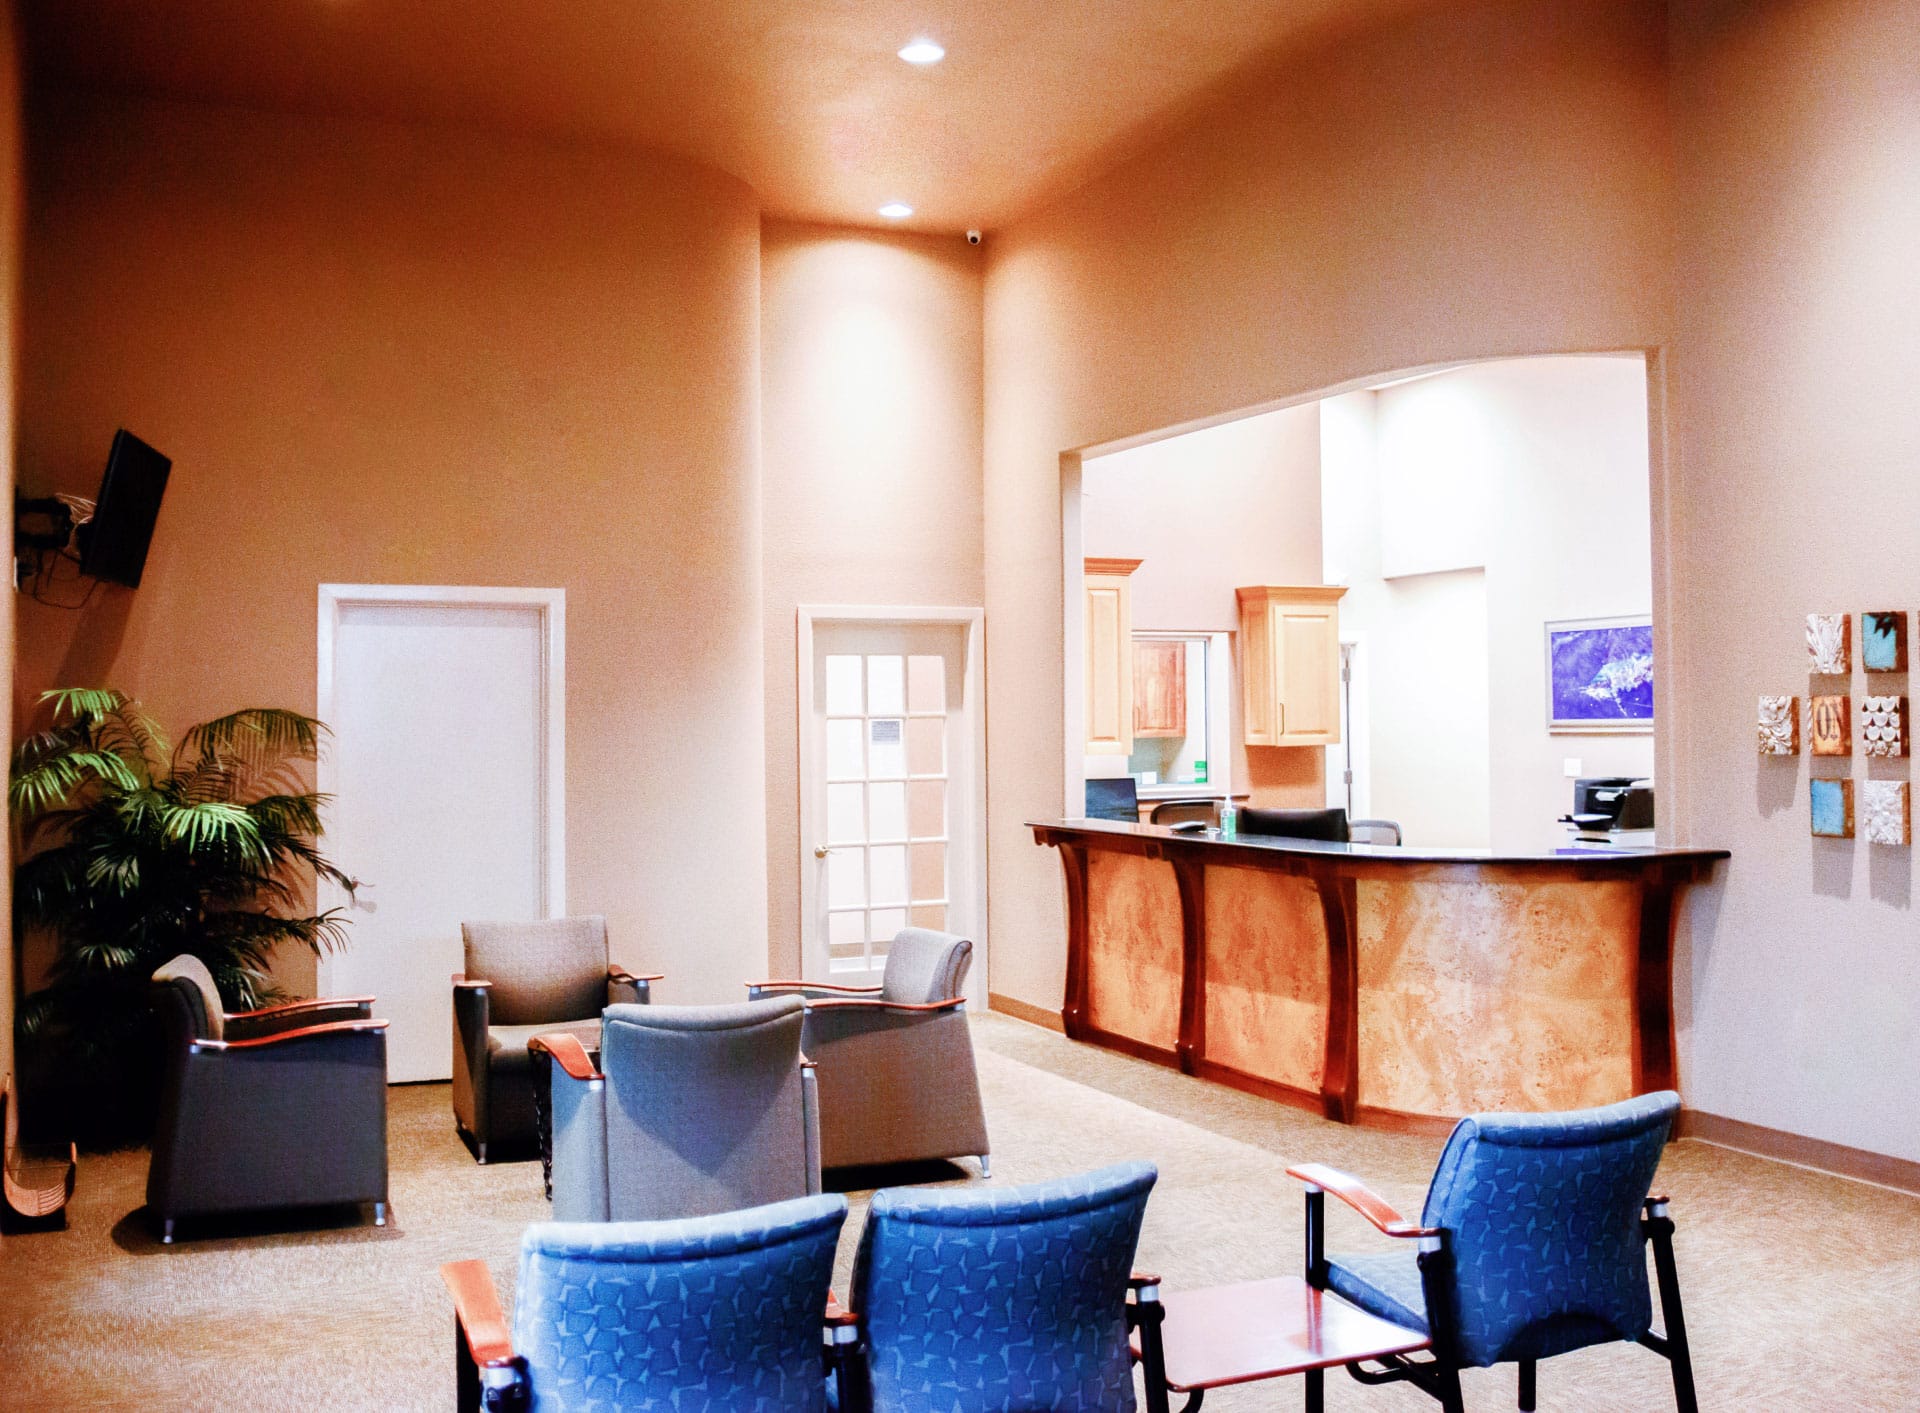 Office reception and front desk area with orange walls and blue chairs